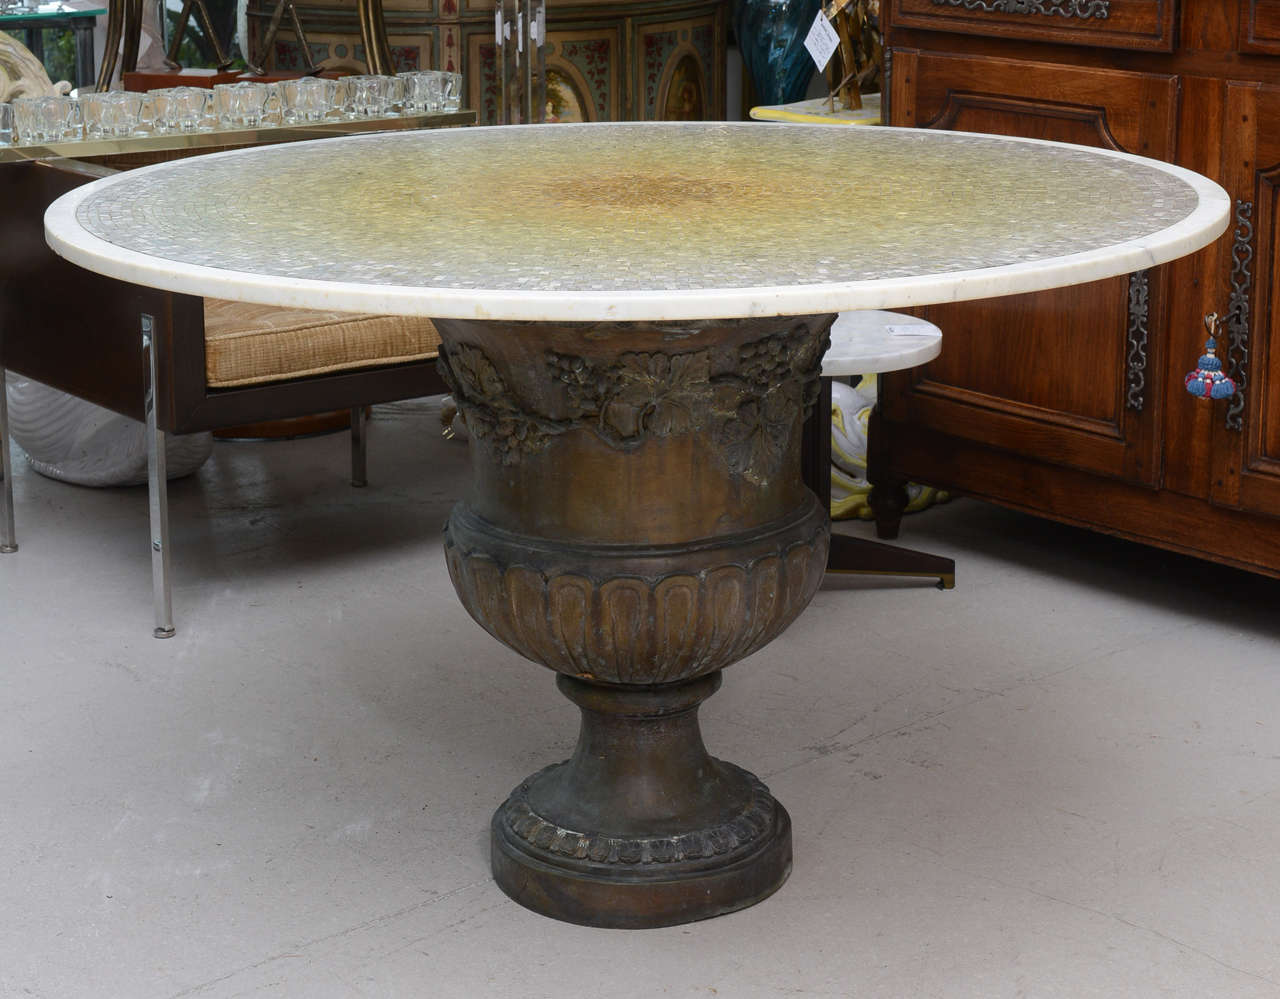 Signed Italian Niccolini metallic glass tiled table with an ornate pedestal bronze base. The tile palette ranges from off white to metallic gold.